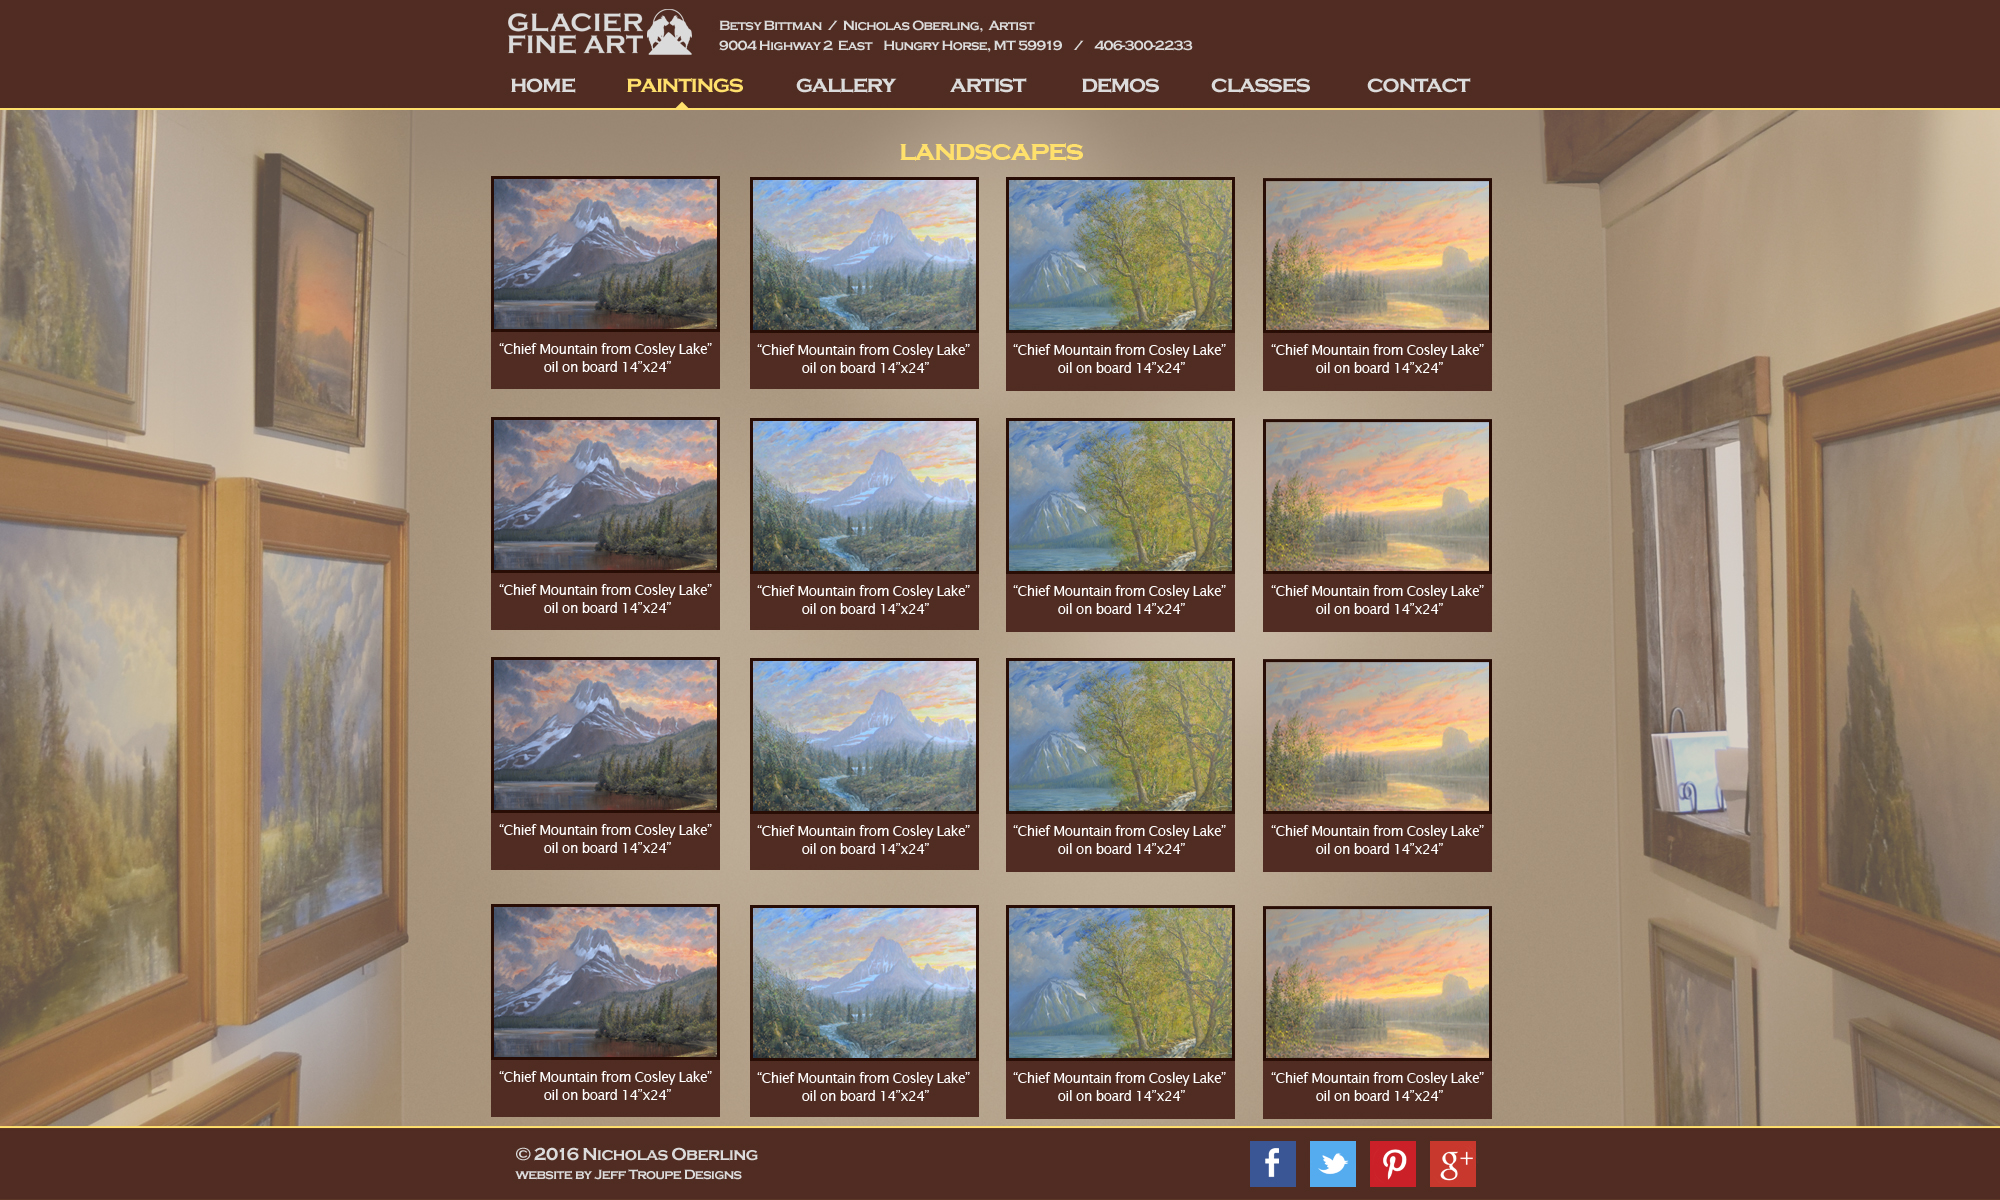 website design image paintings of mountains and trees inside art gallery